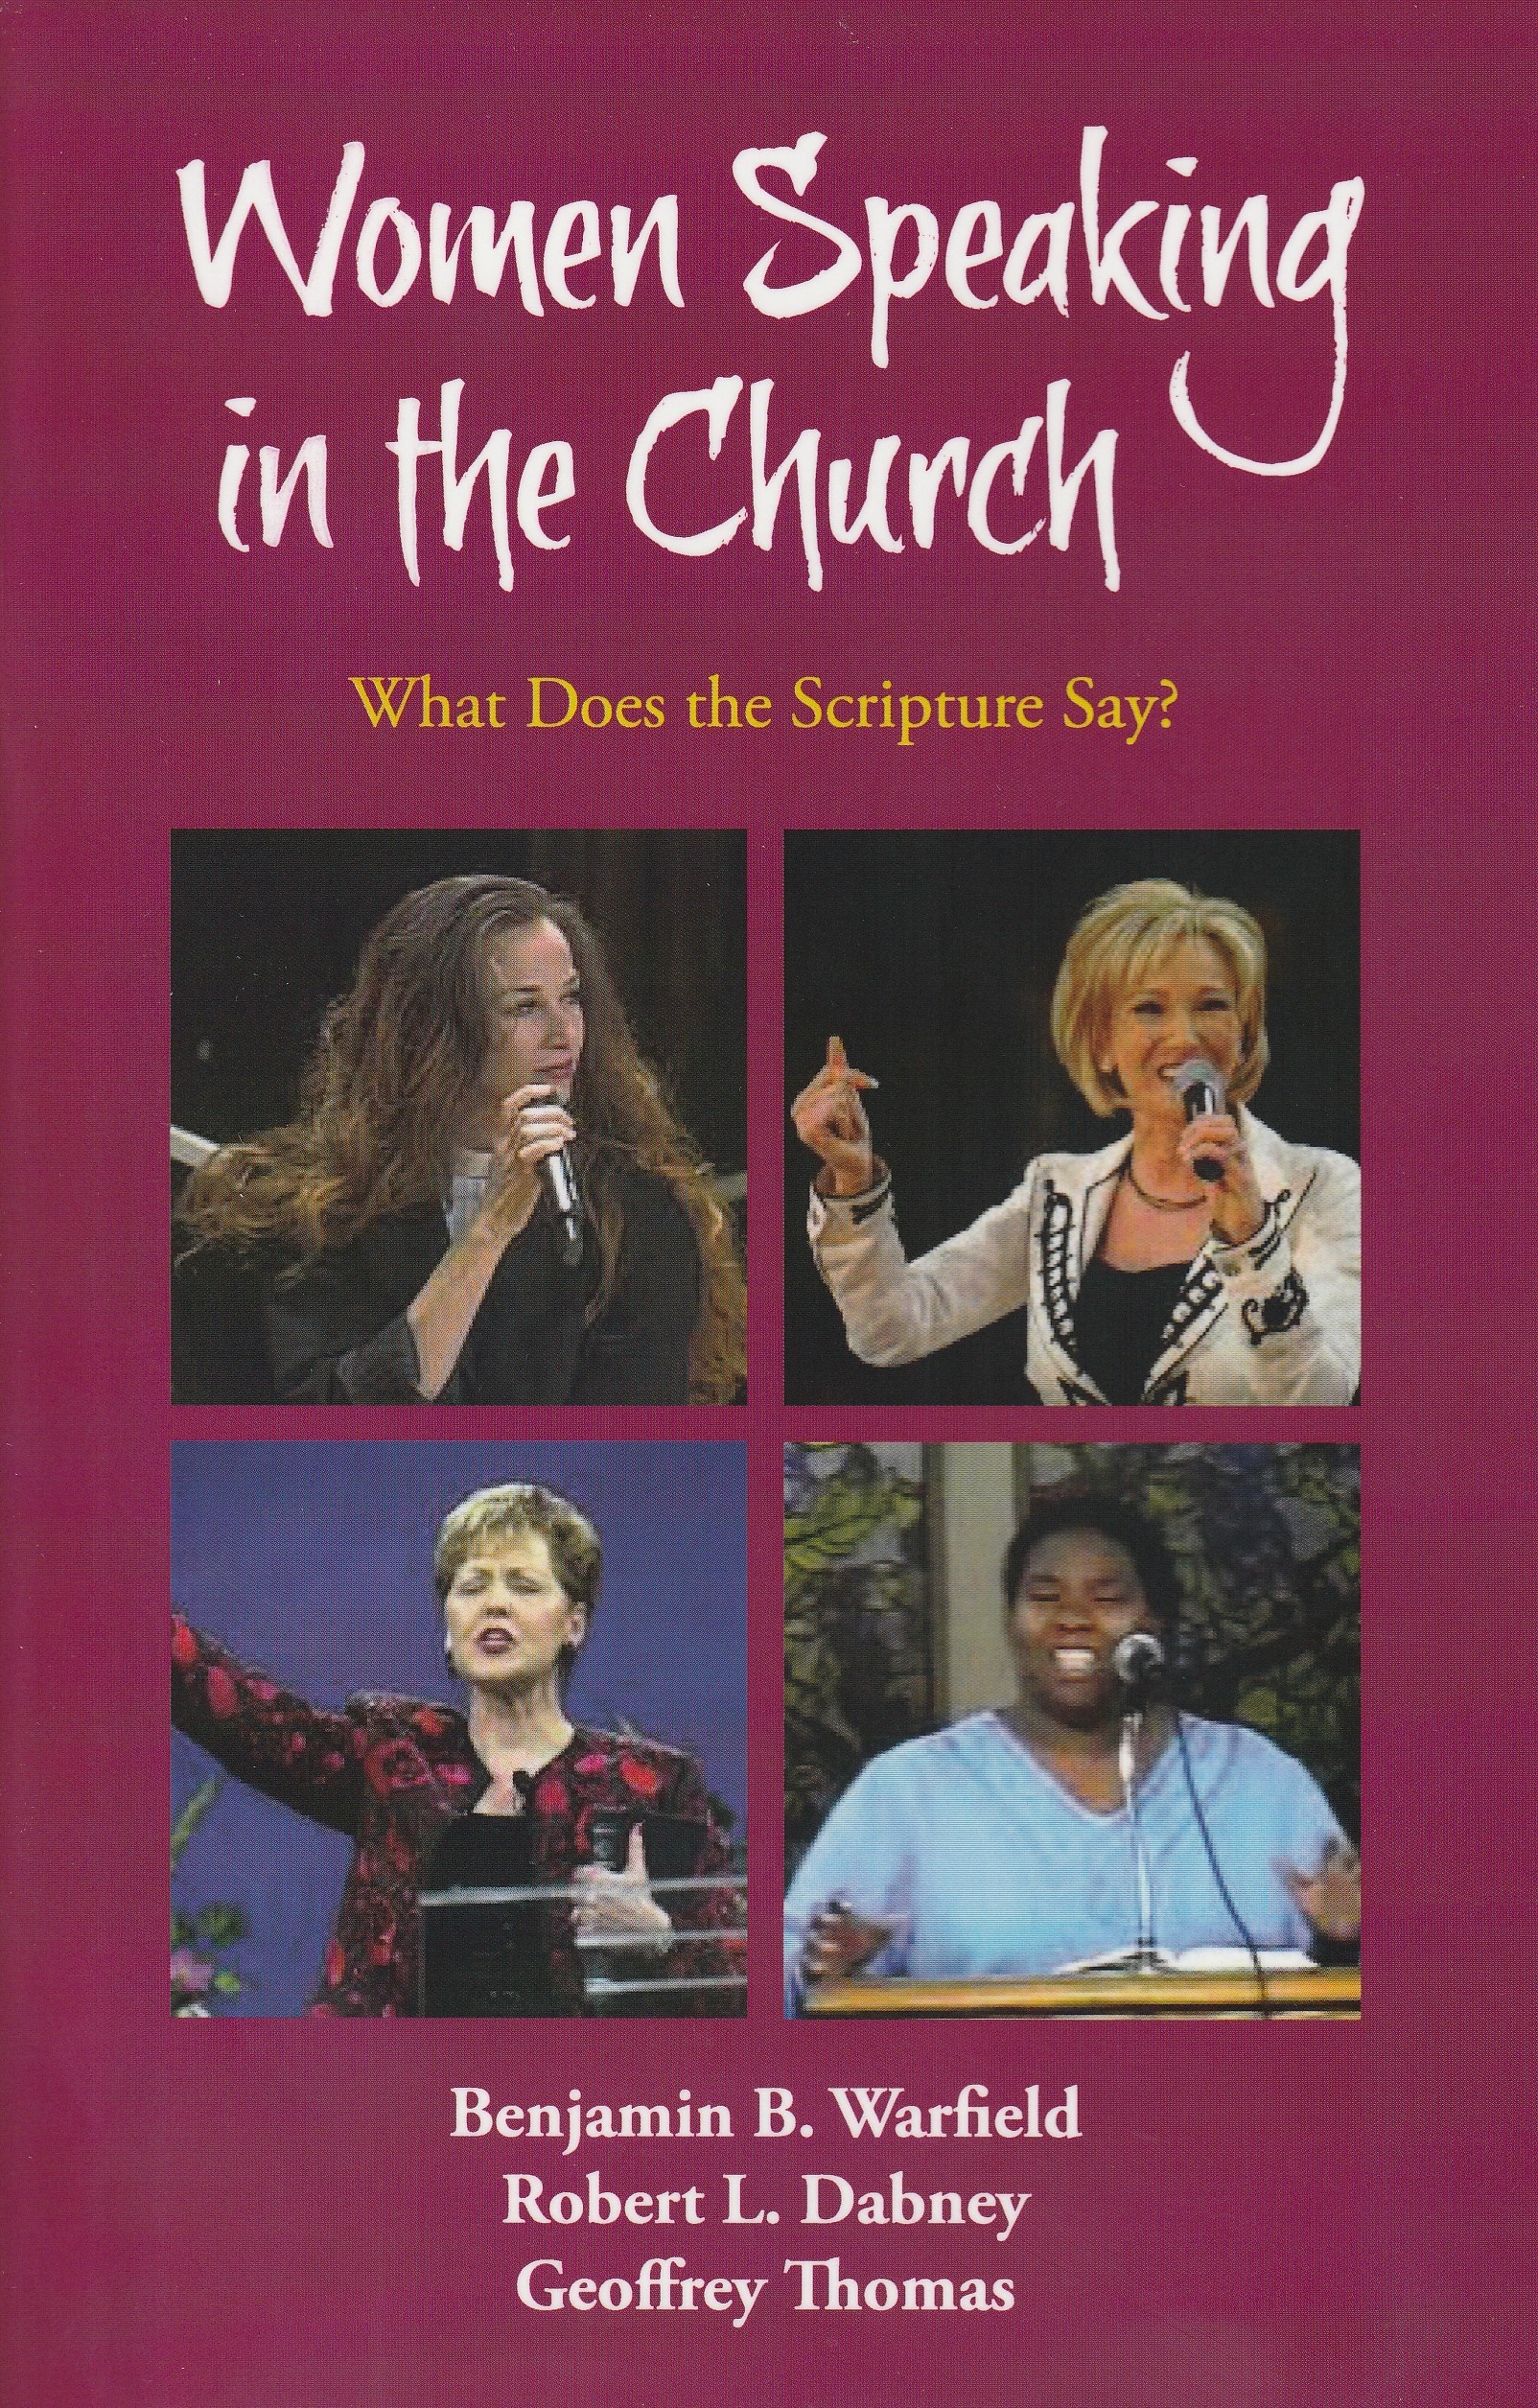 Women Speaking in the Church: What Do the Scriptures Say?